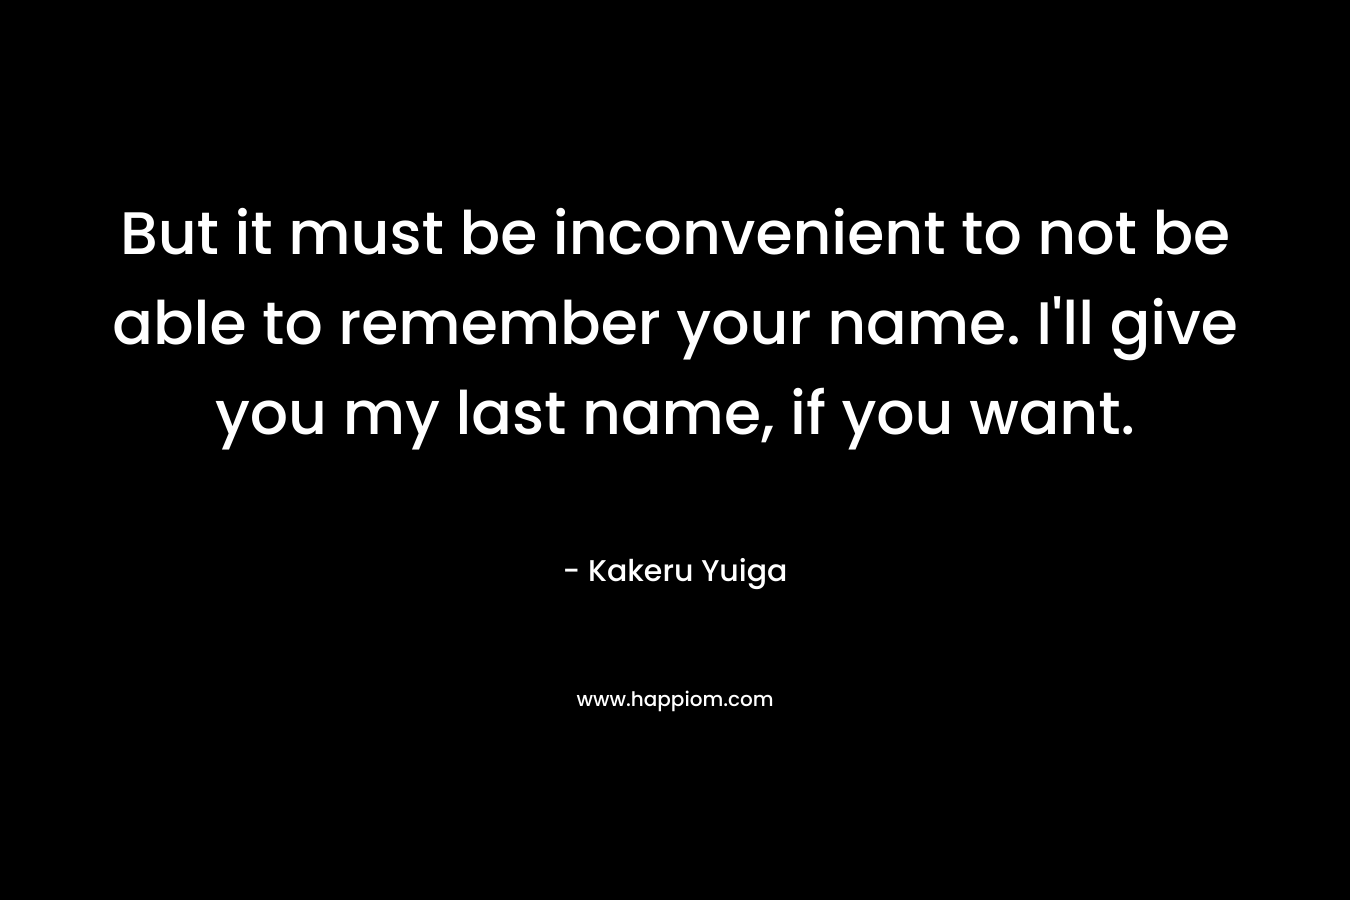 But it must be inconvenient to not be able to remember your name. I’ll give you my last name, if you want. – Kakeru Yuiga